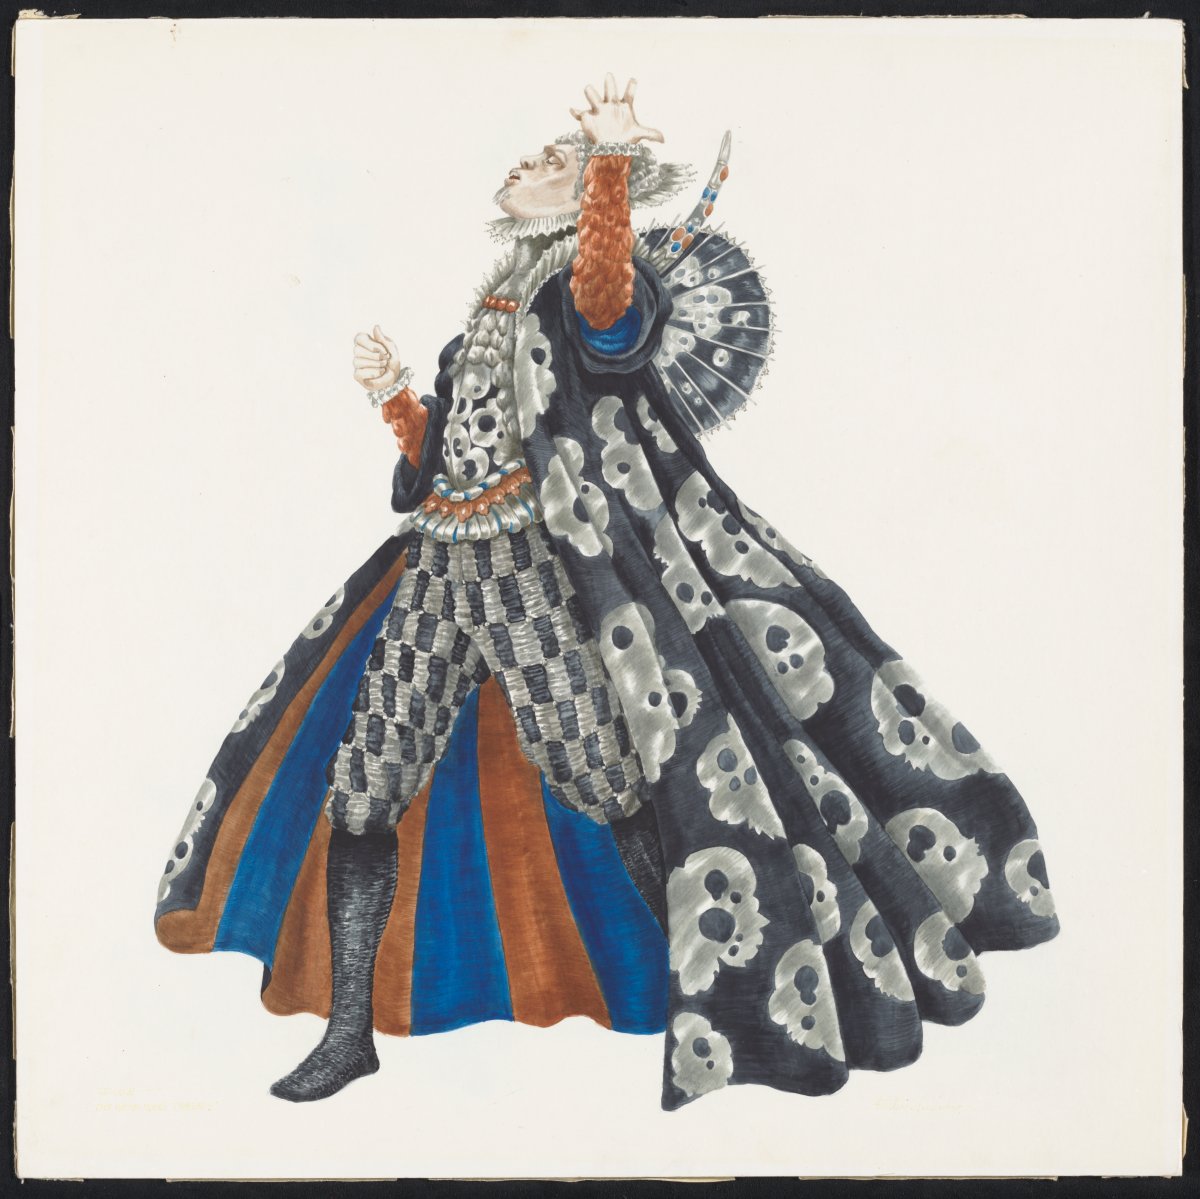 A sketch of a man modelling a costume. The costume is similar to the court dress of Tudor England with big neck ruffles and a long coat. The coat has stylised skulls on it. Underneath he is wearing an embroidered waistcoat and black and white checkered pants. The inner lining of the cloak is red and blue stripes